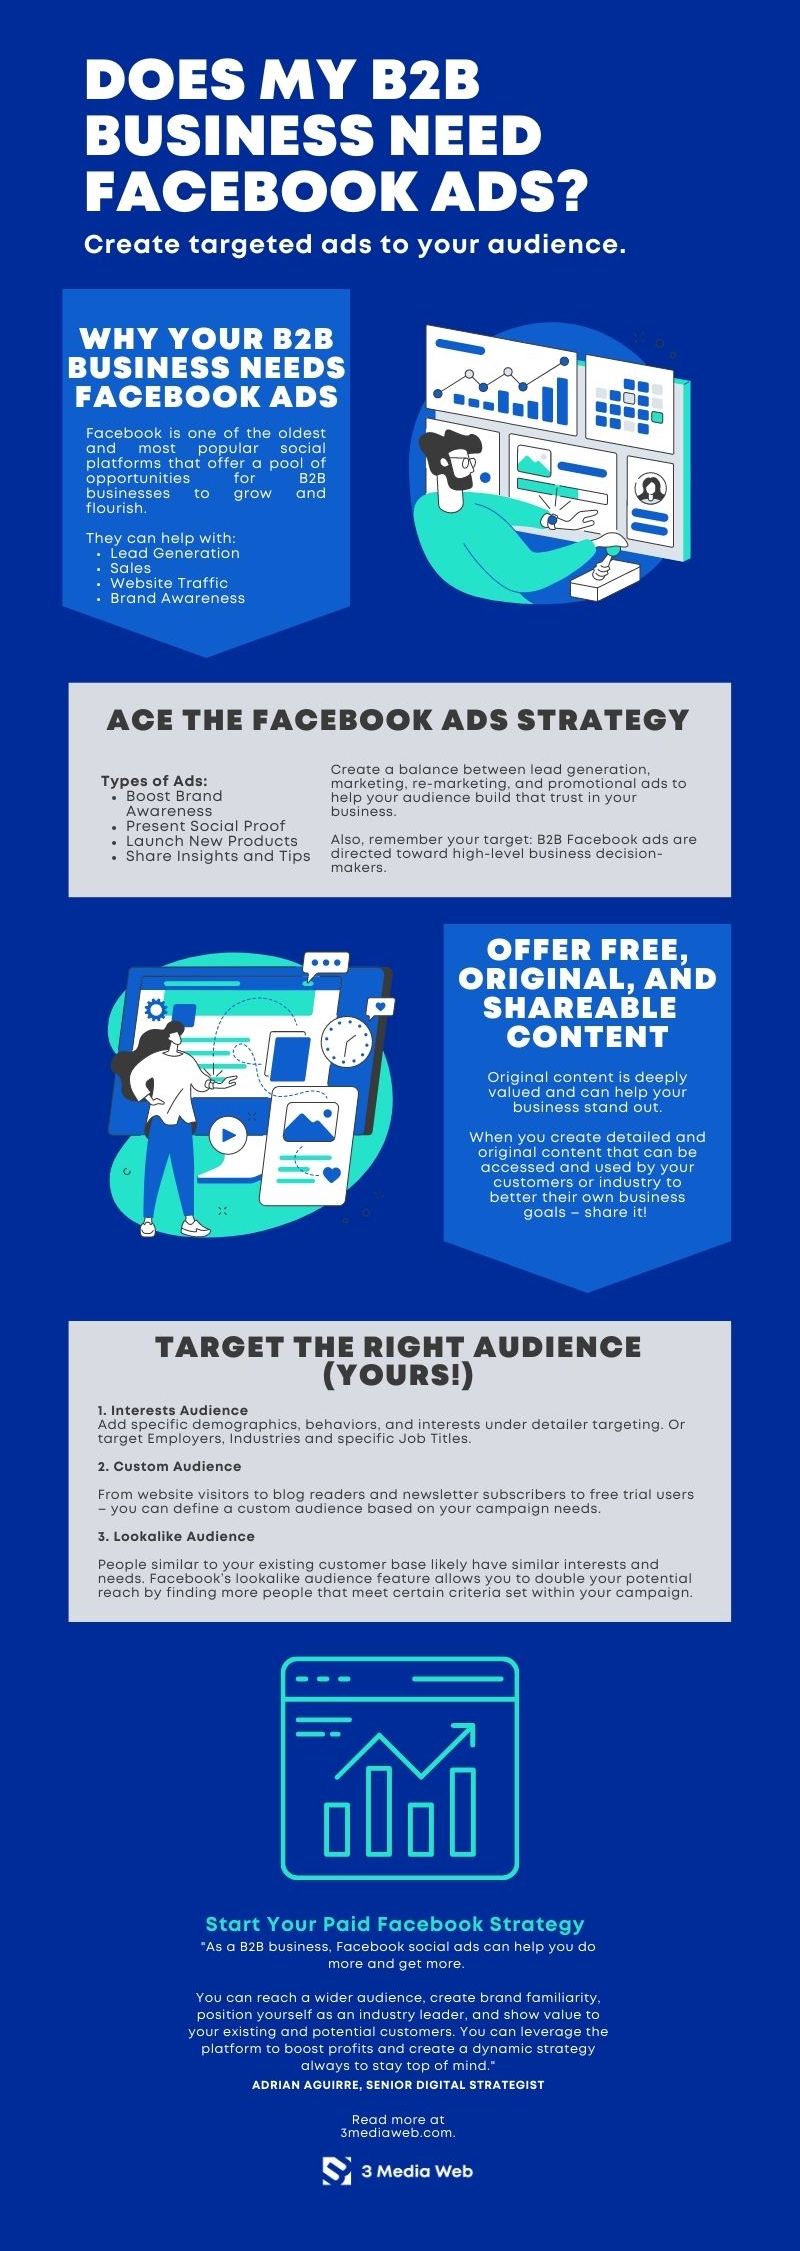 Learn how to get started with Facebook Ads with this infographic. 